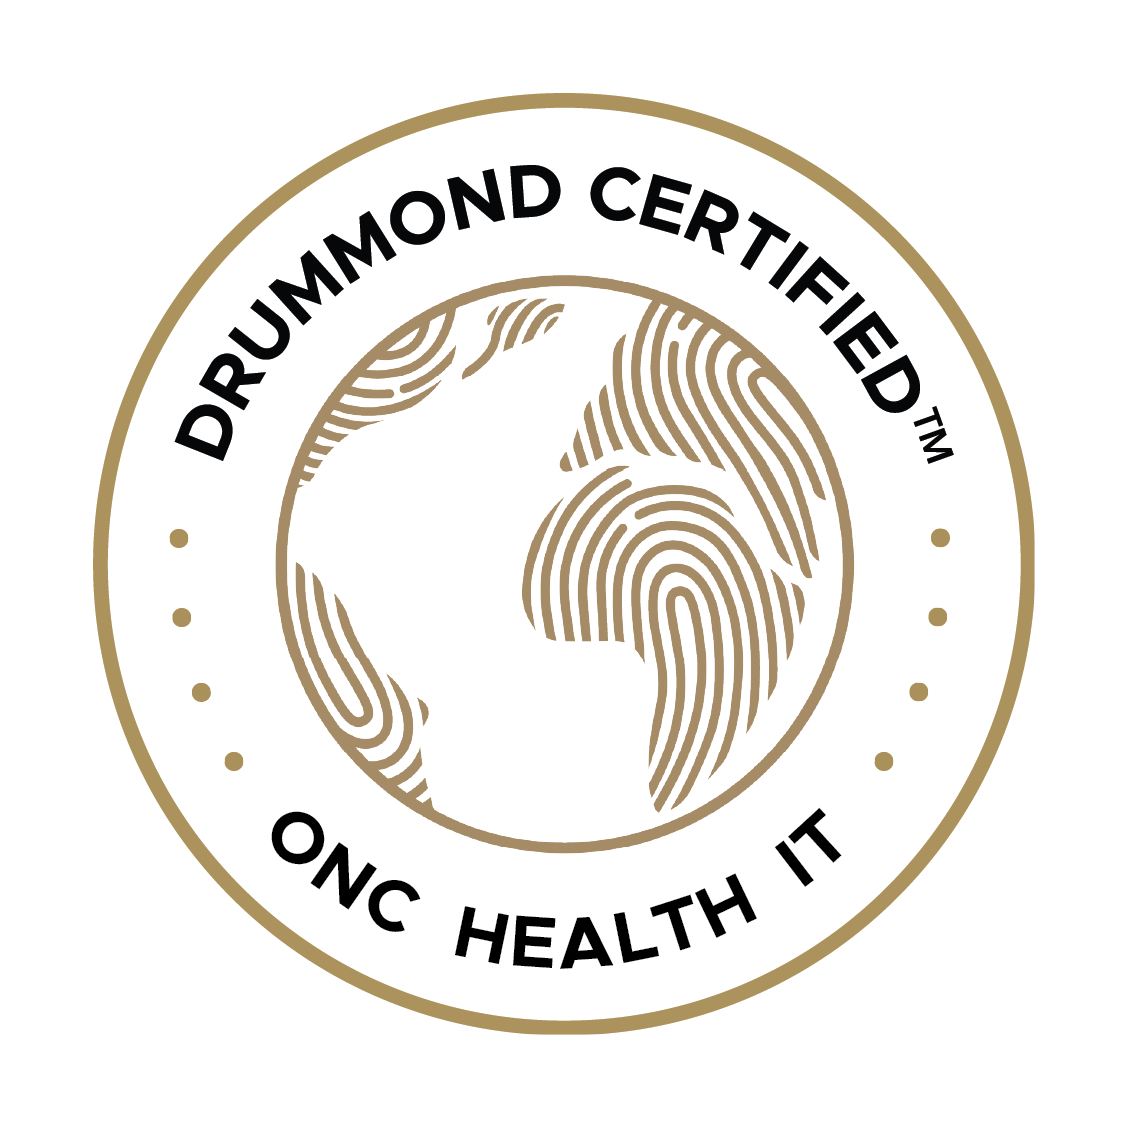 Meaningful Use Stage 3 - Drummond Certification